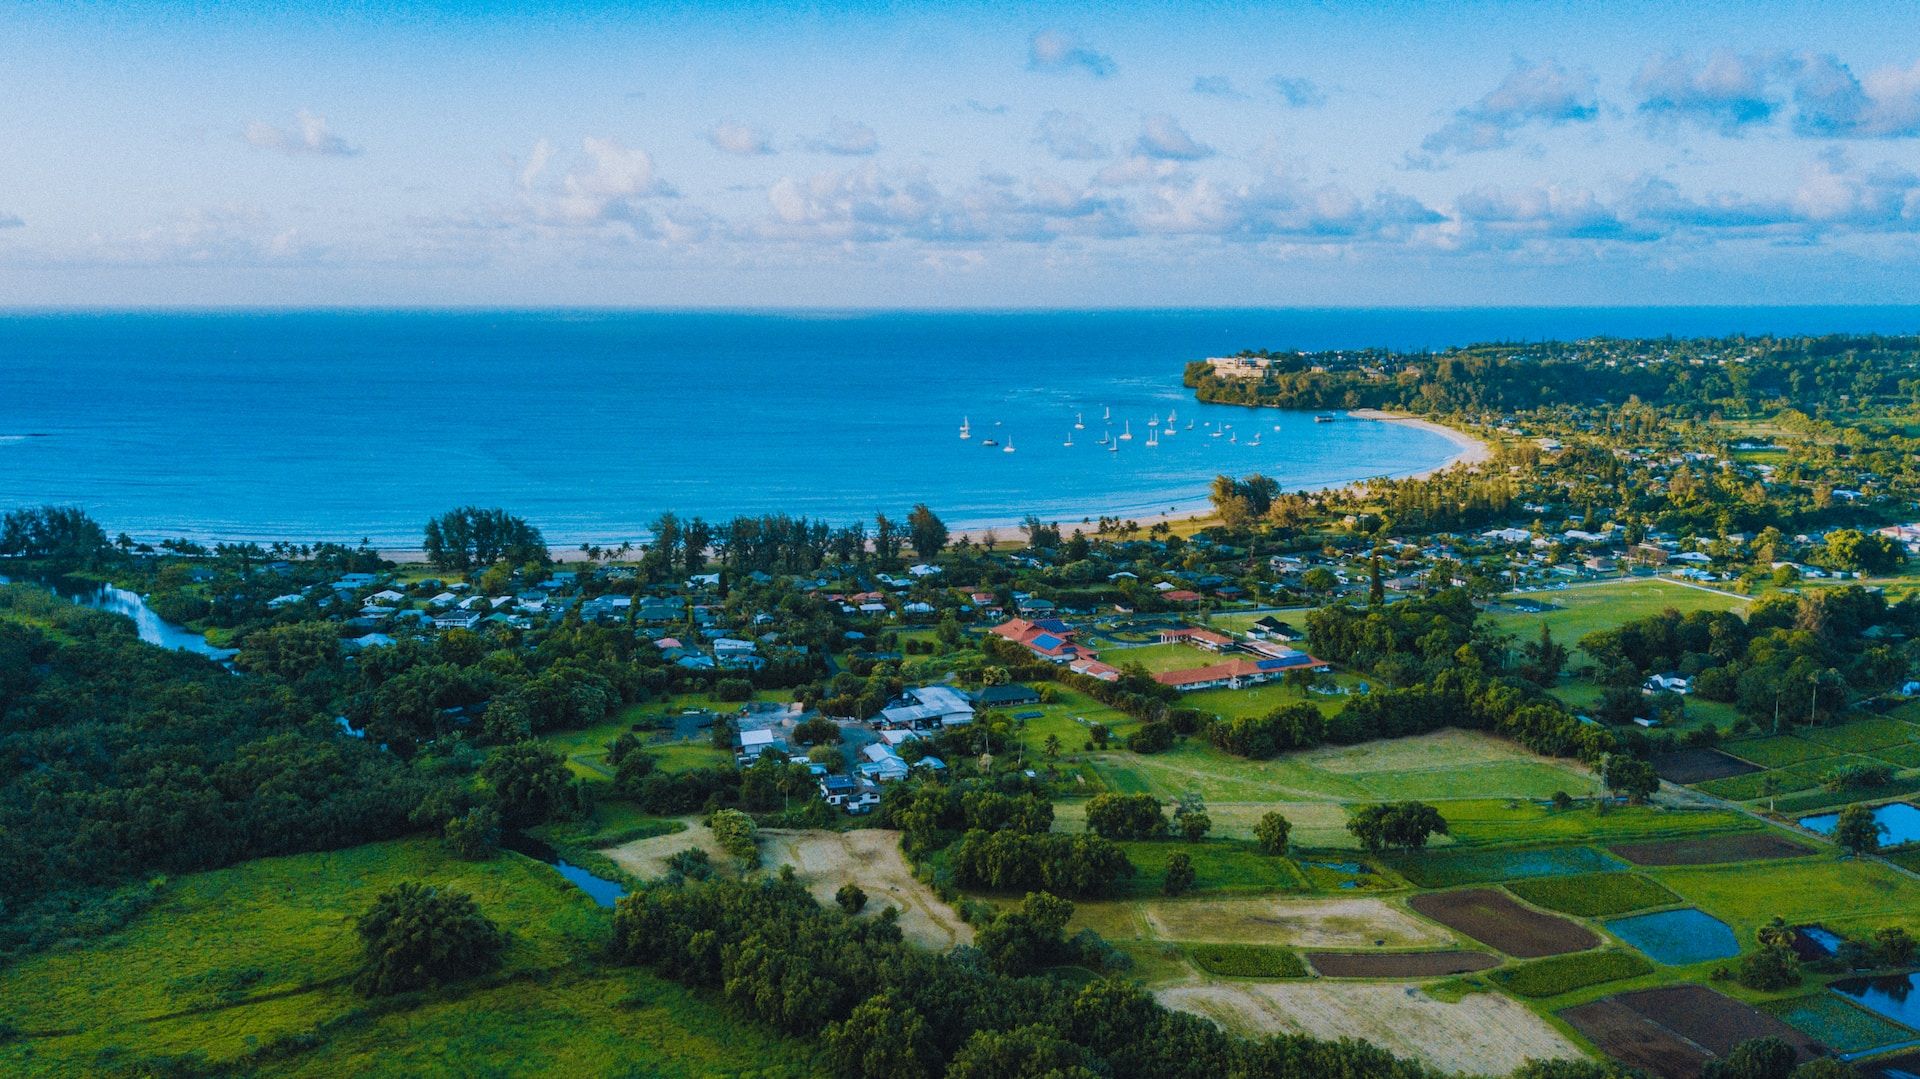 An aerial view of Hanalei, Hawaii, United States 